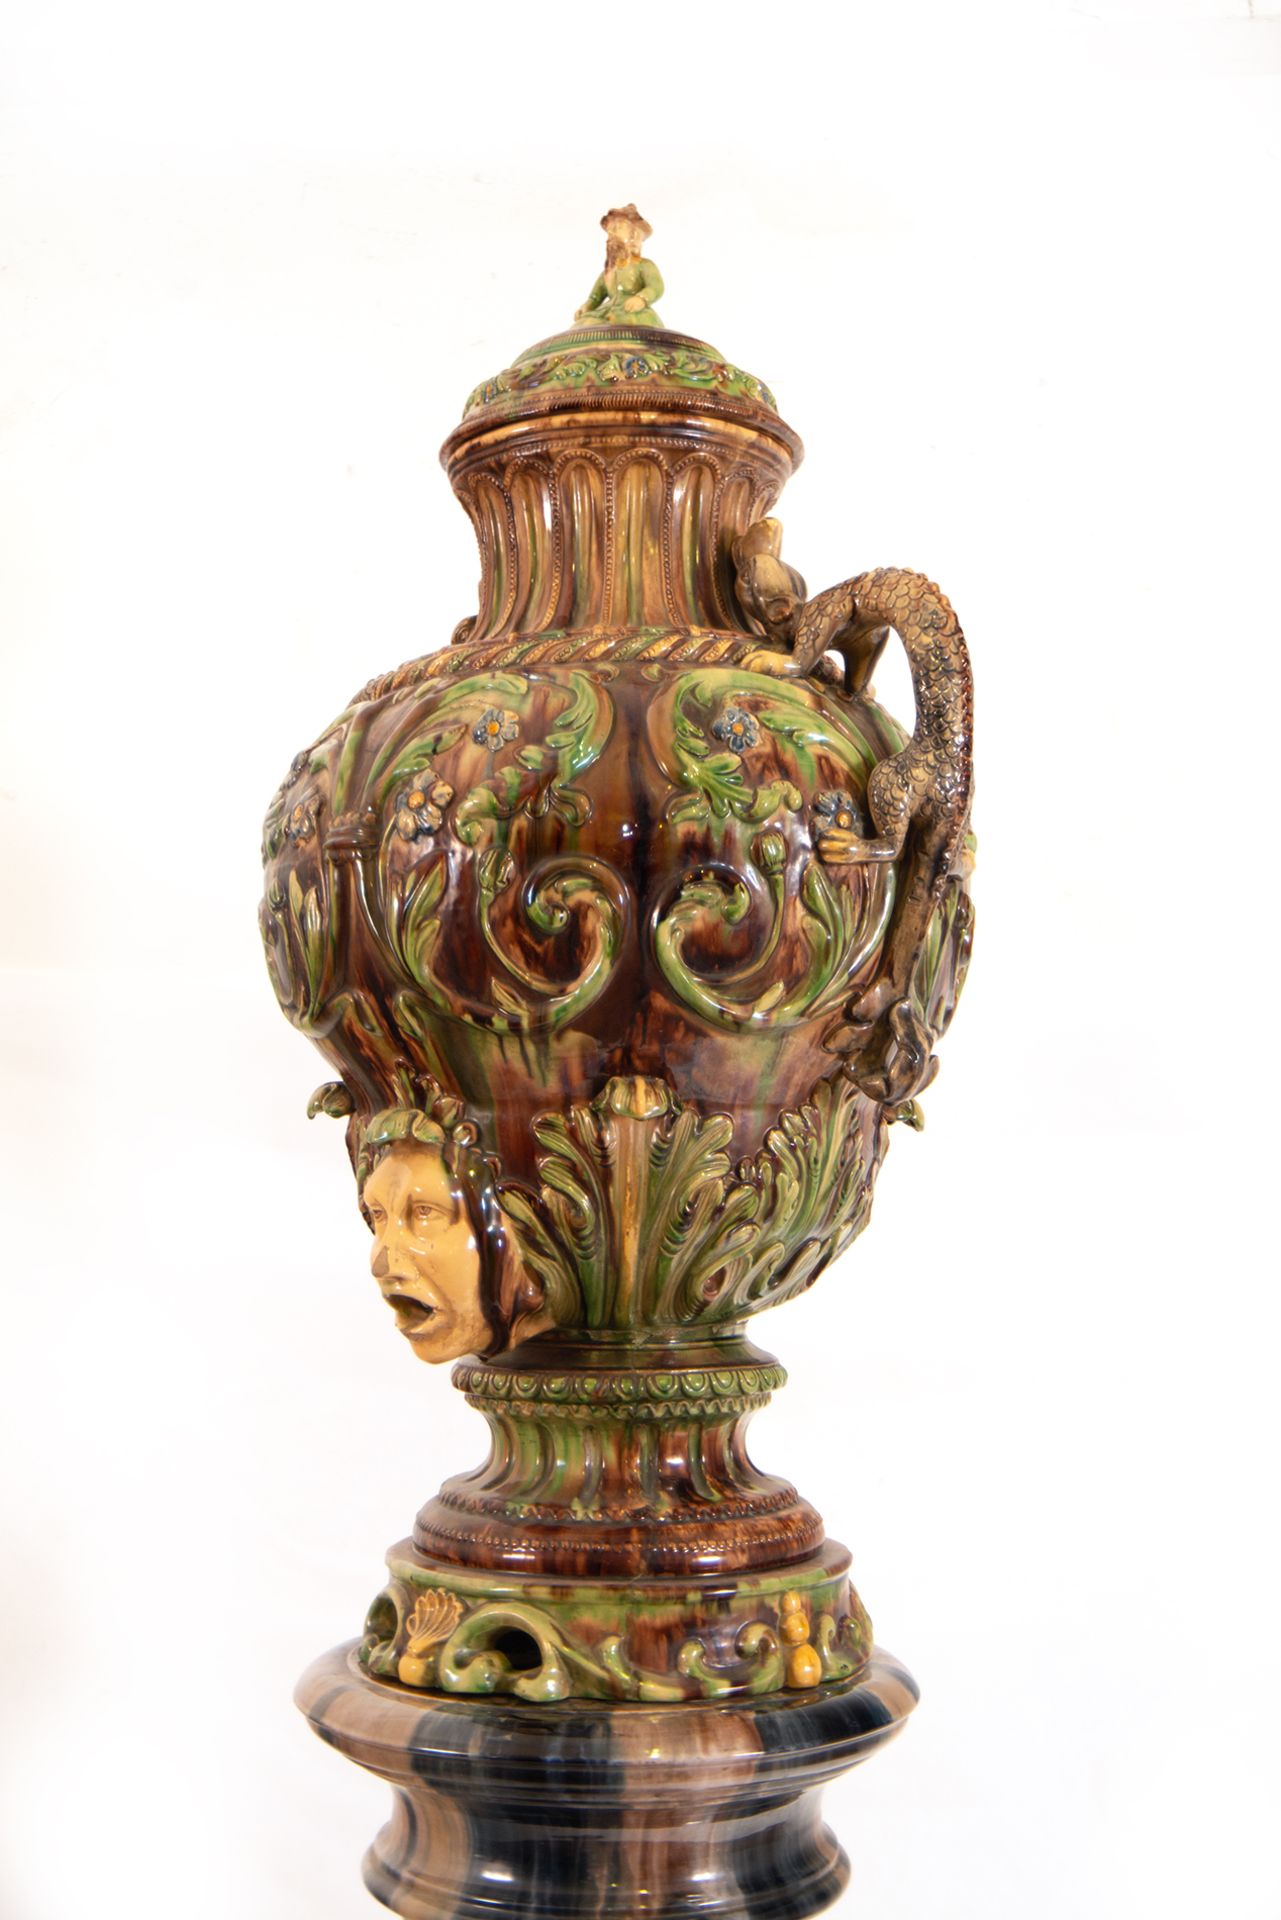 Ewer in enameled stoneware in the Art Nouveau style, French or Italian school of the 19th - 20th cen - Image 6 of 11